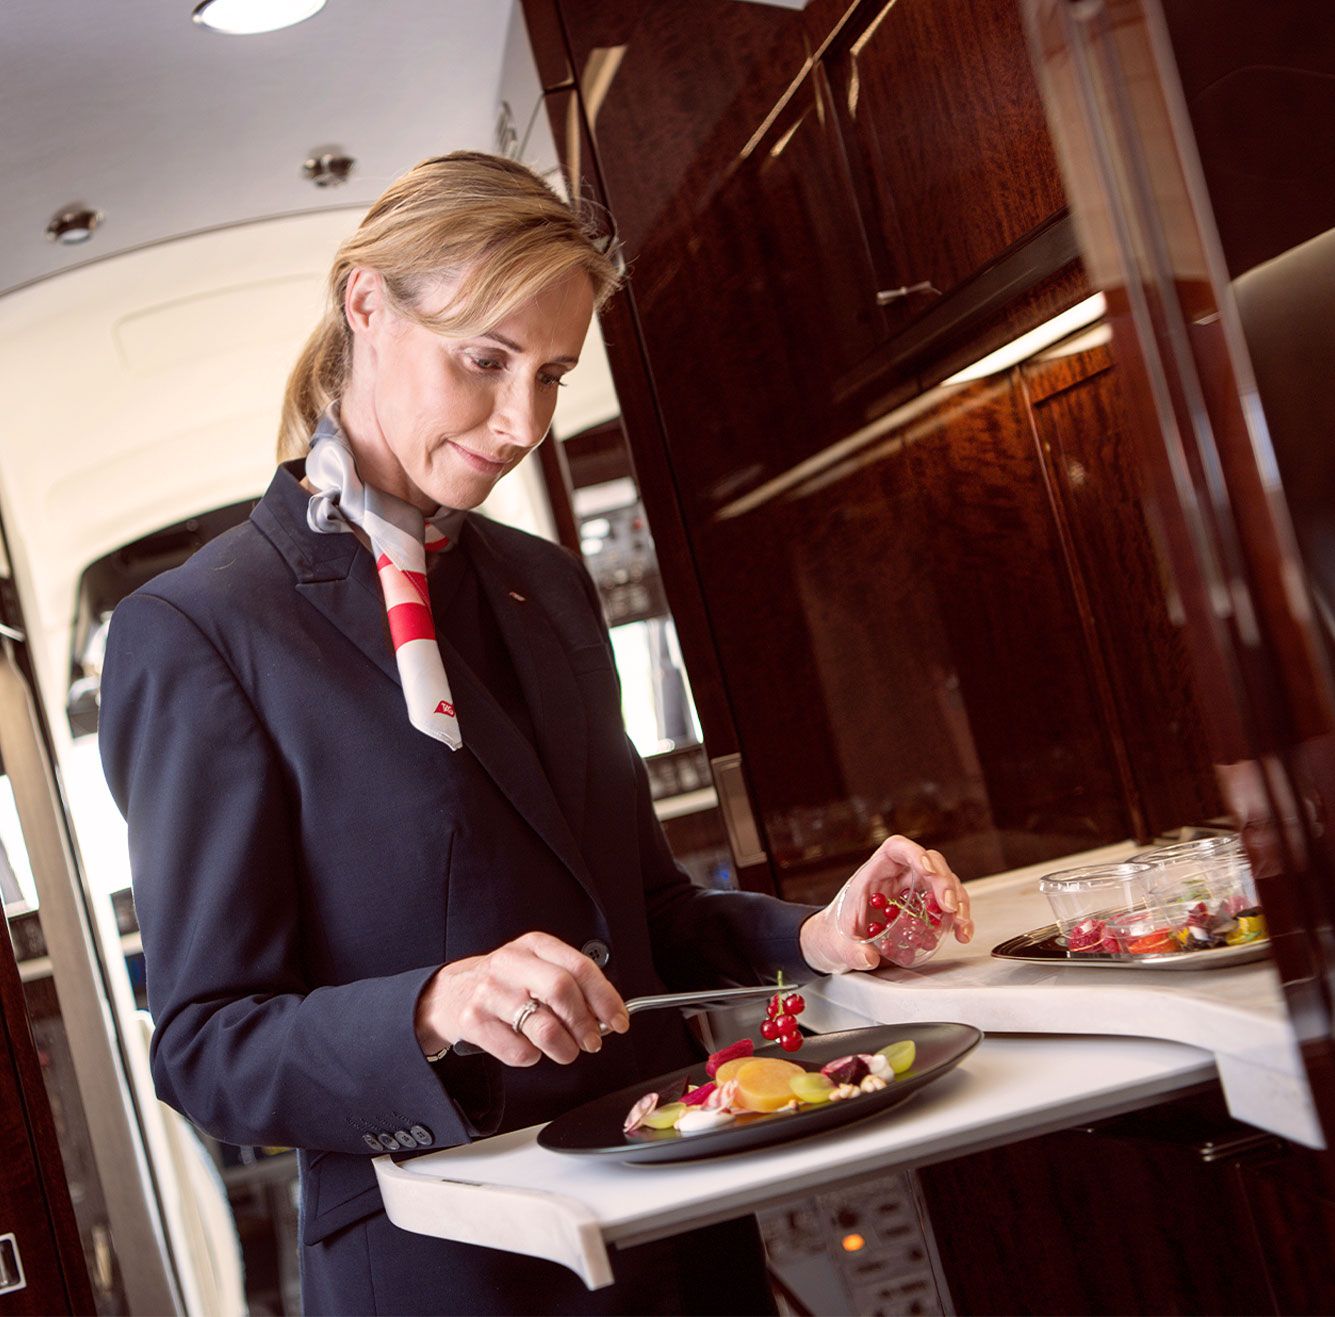 A Flight Attendant prepares food onboard a private jet.